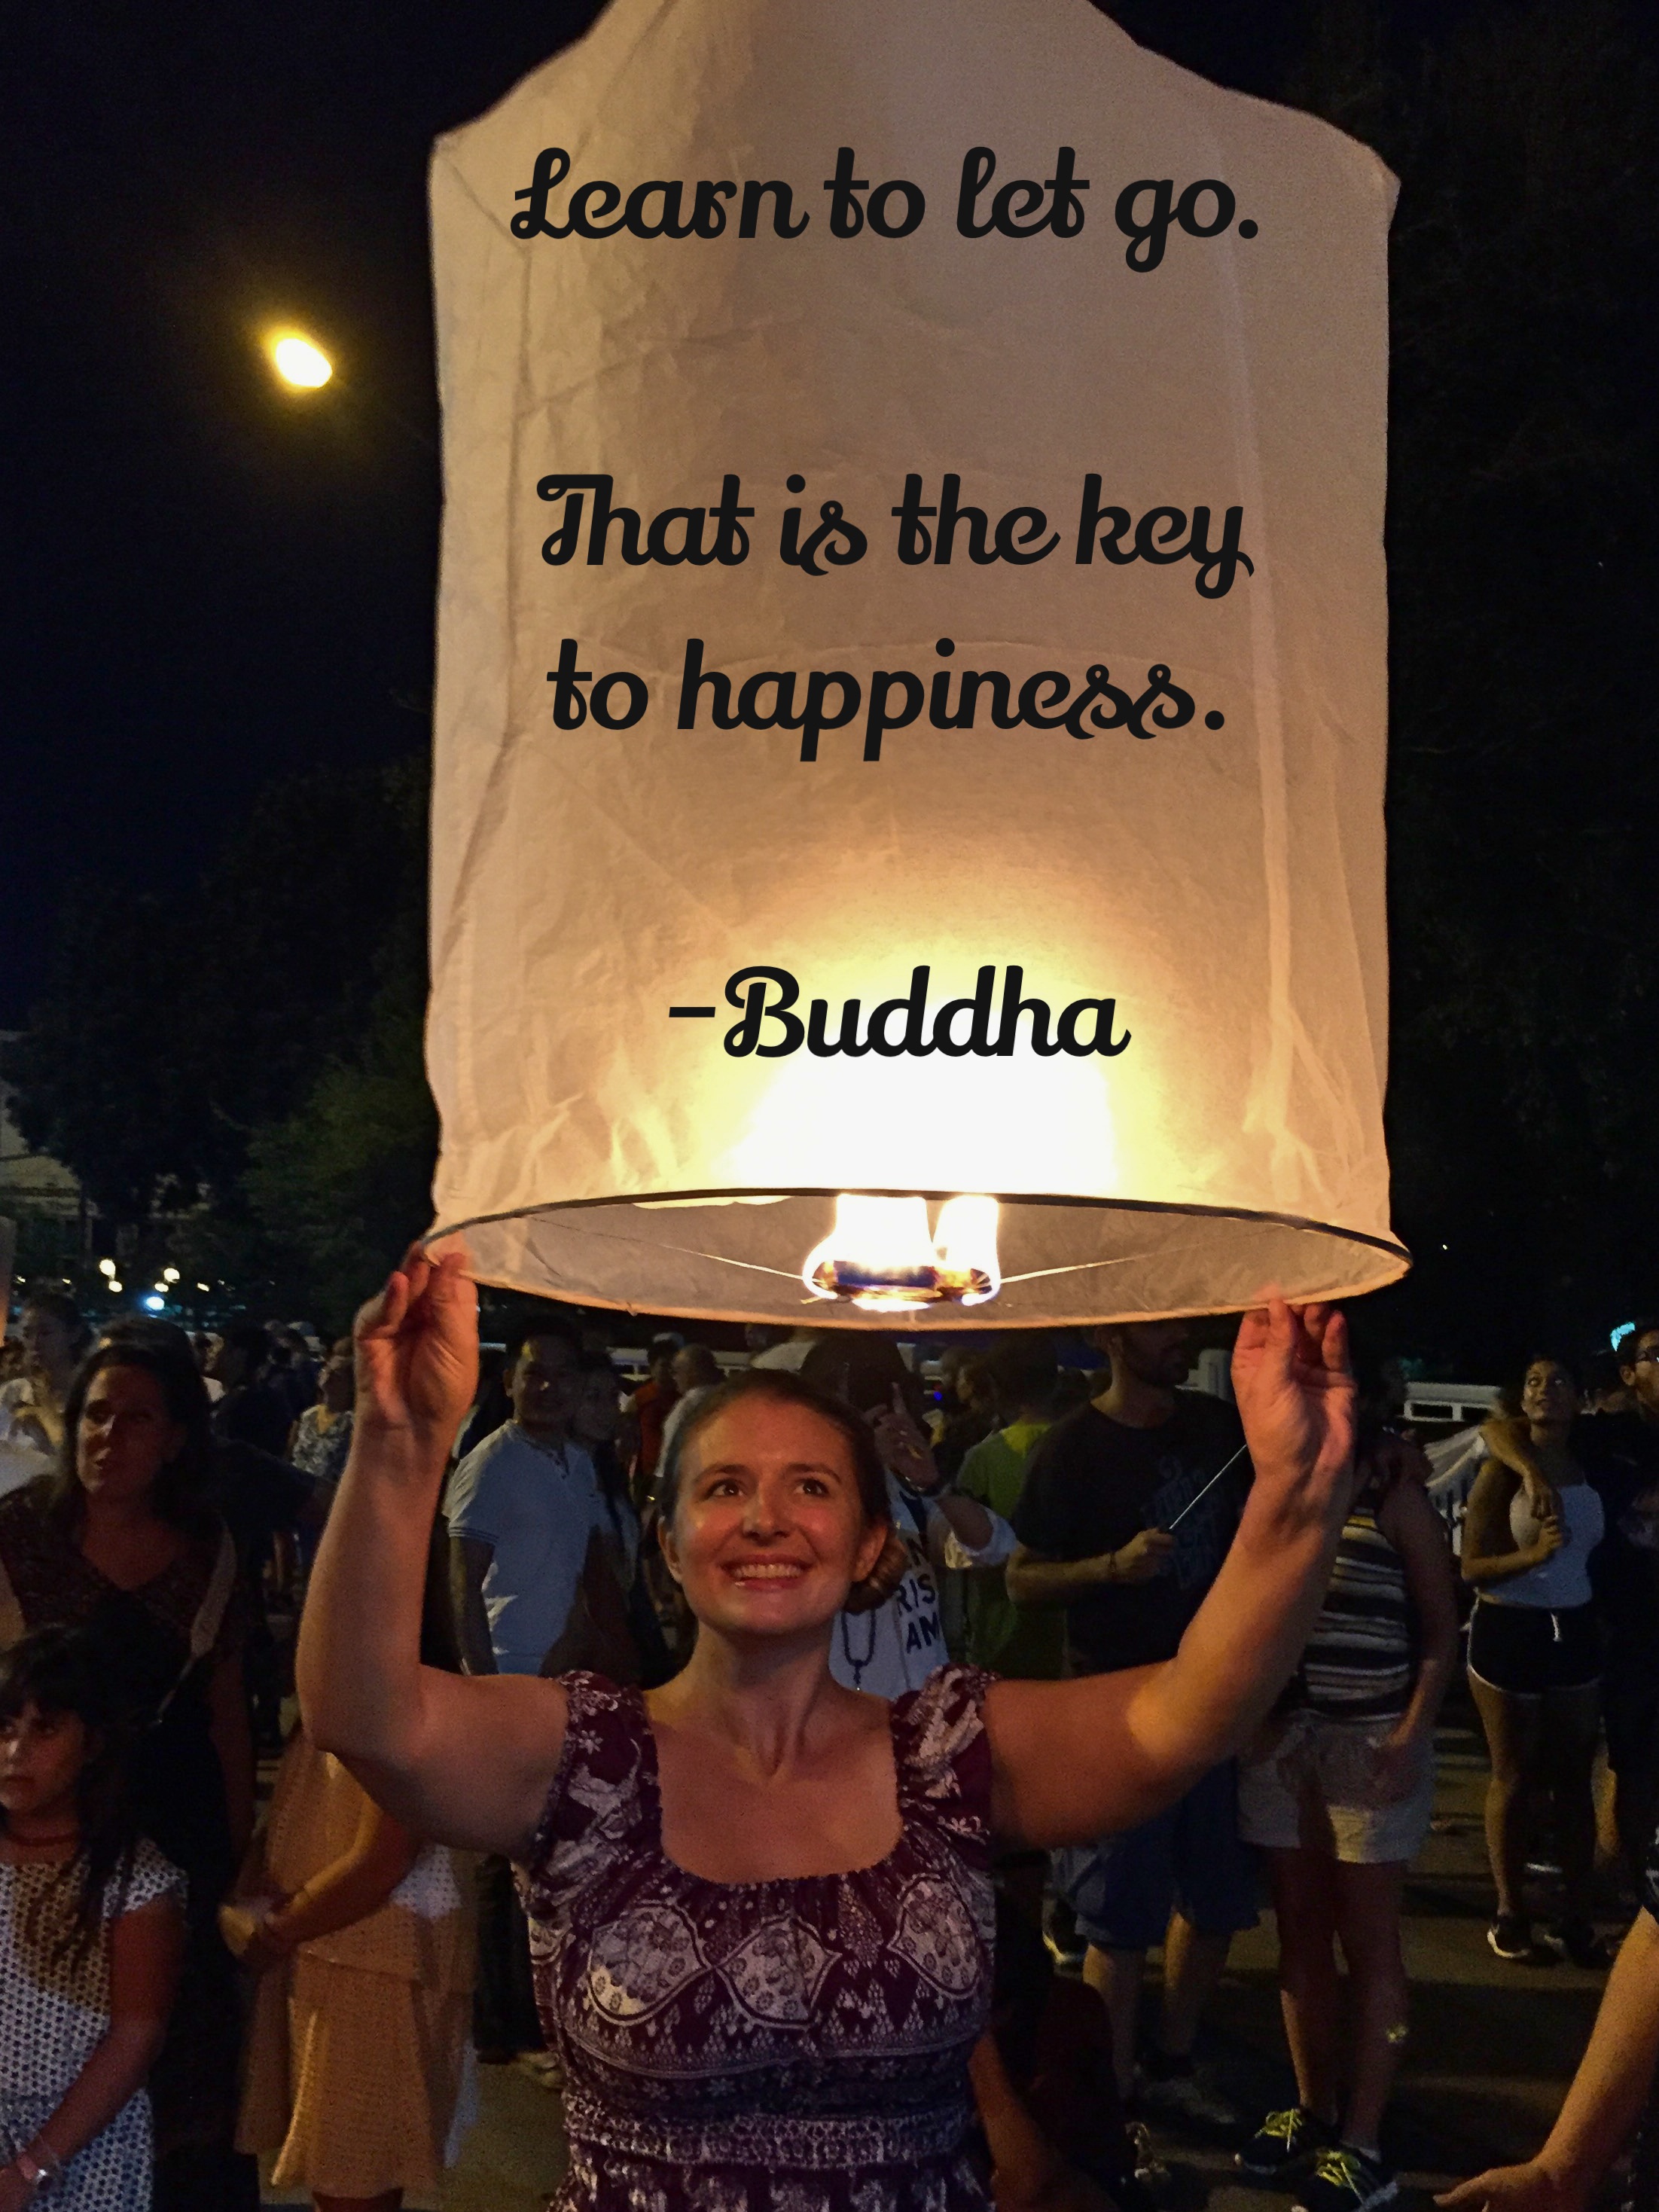 "Learn to let go. This is the key to happiness." - Buddha